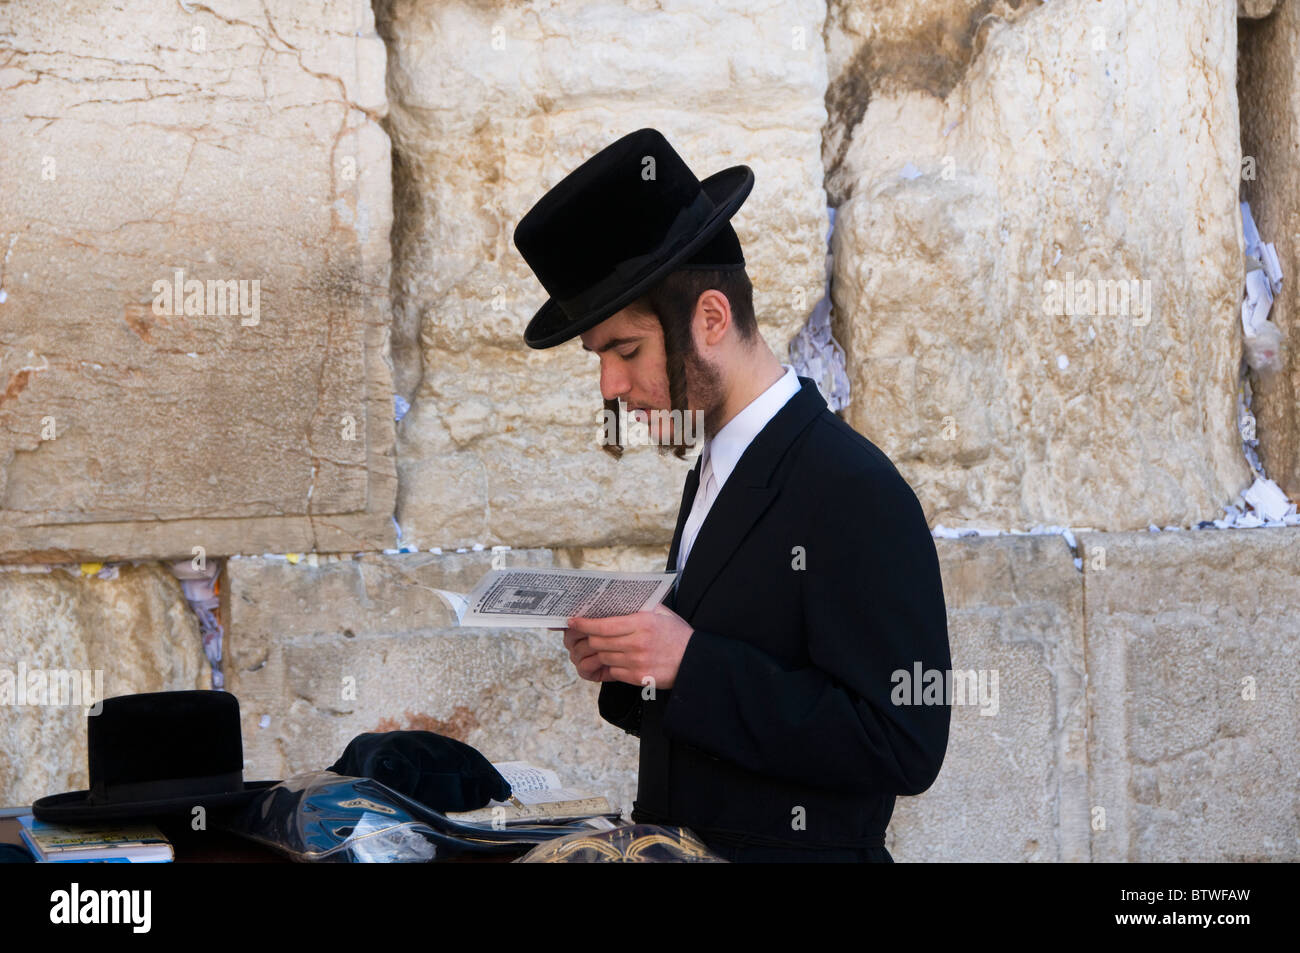 Hassidic Jew in prayer at the Western Wall in Jerusalem Stock Photo